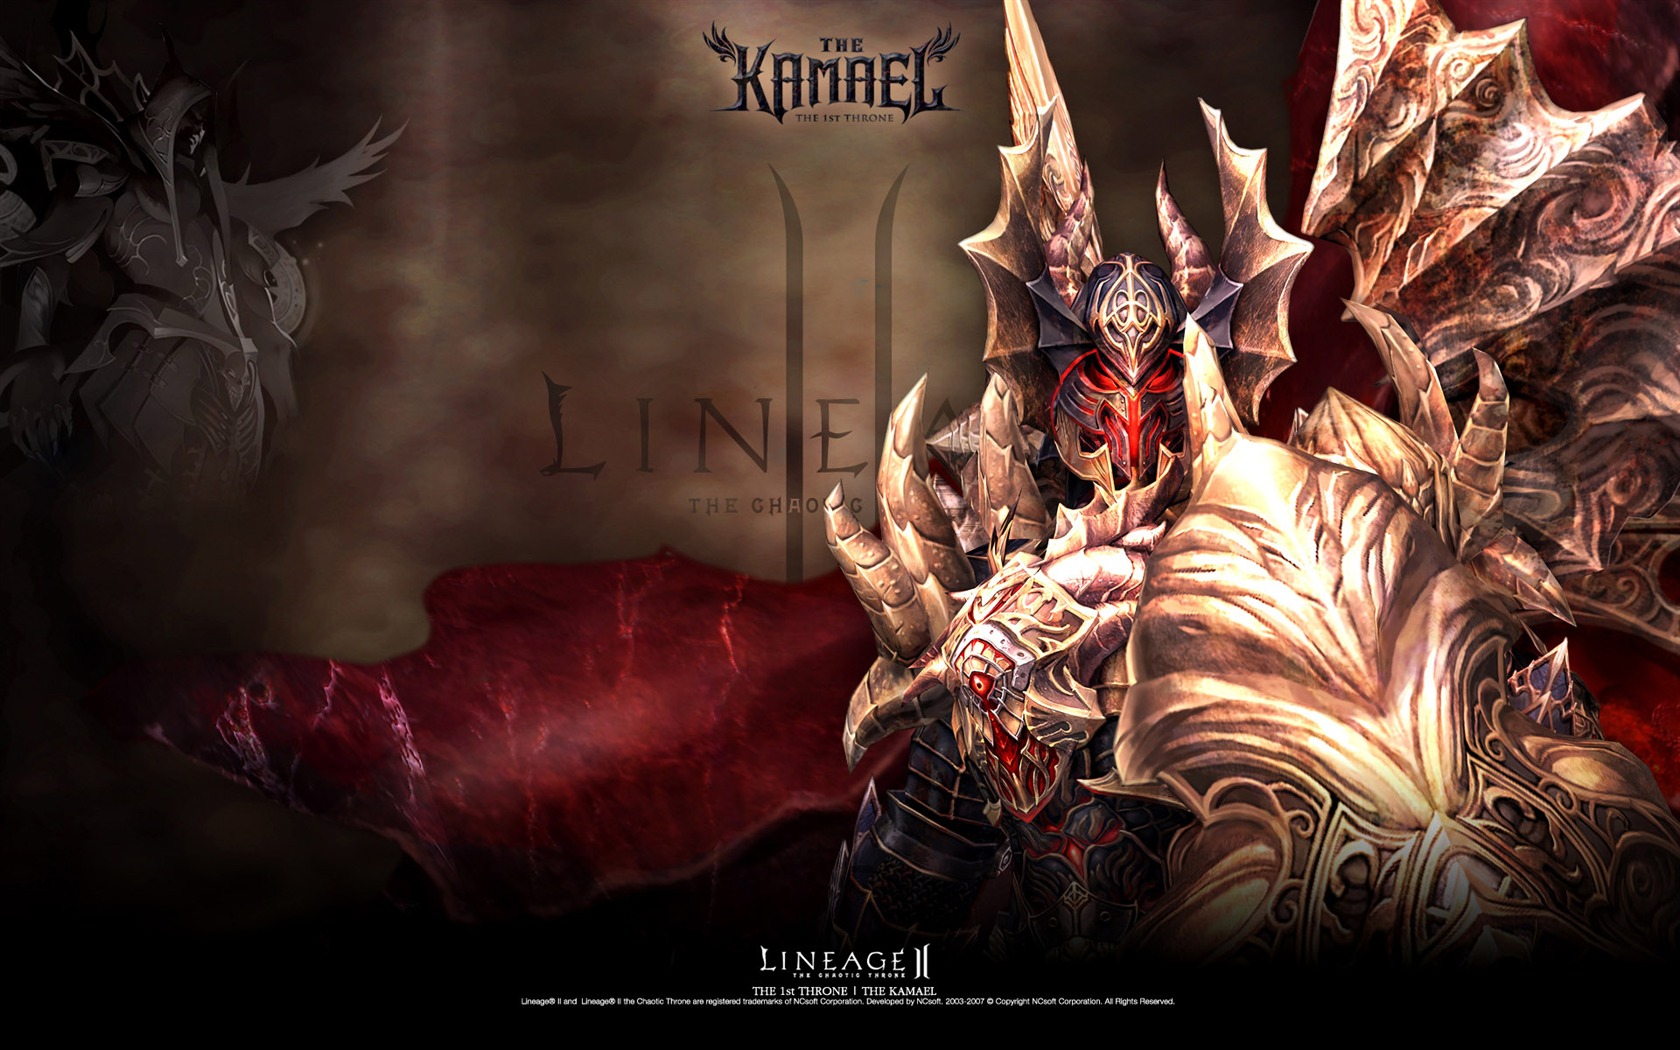 LINEAGE Ⅱ Modellierung HD-Gaming-Wallpaper #11 - 1680x1050